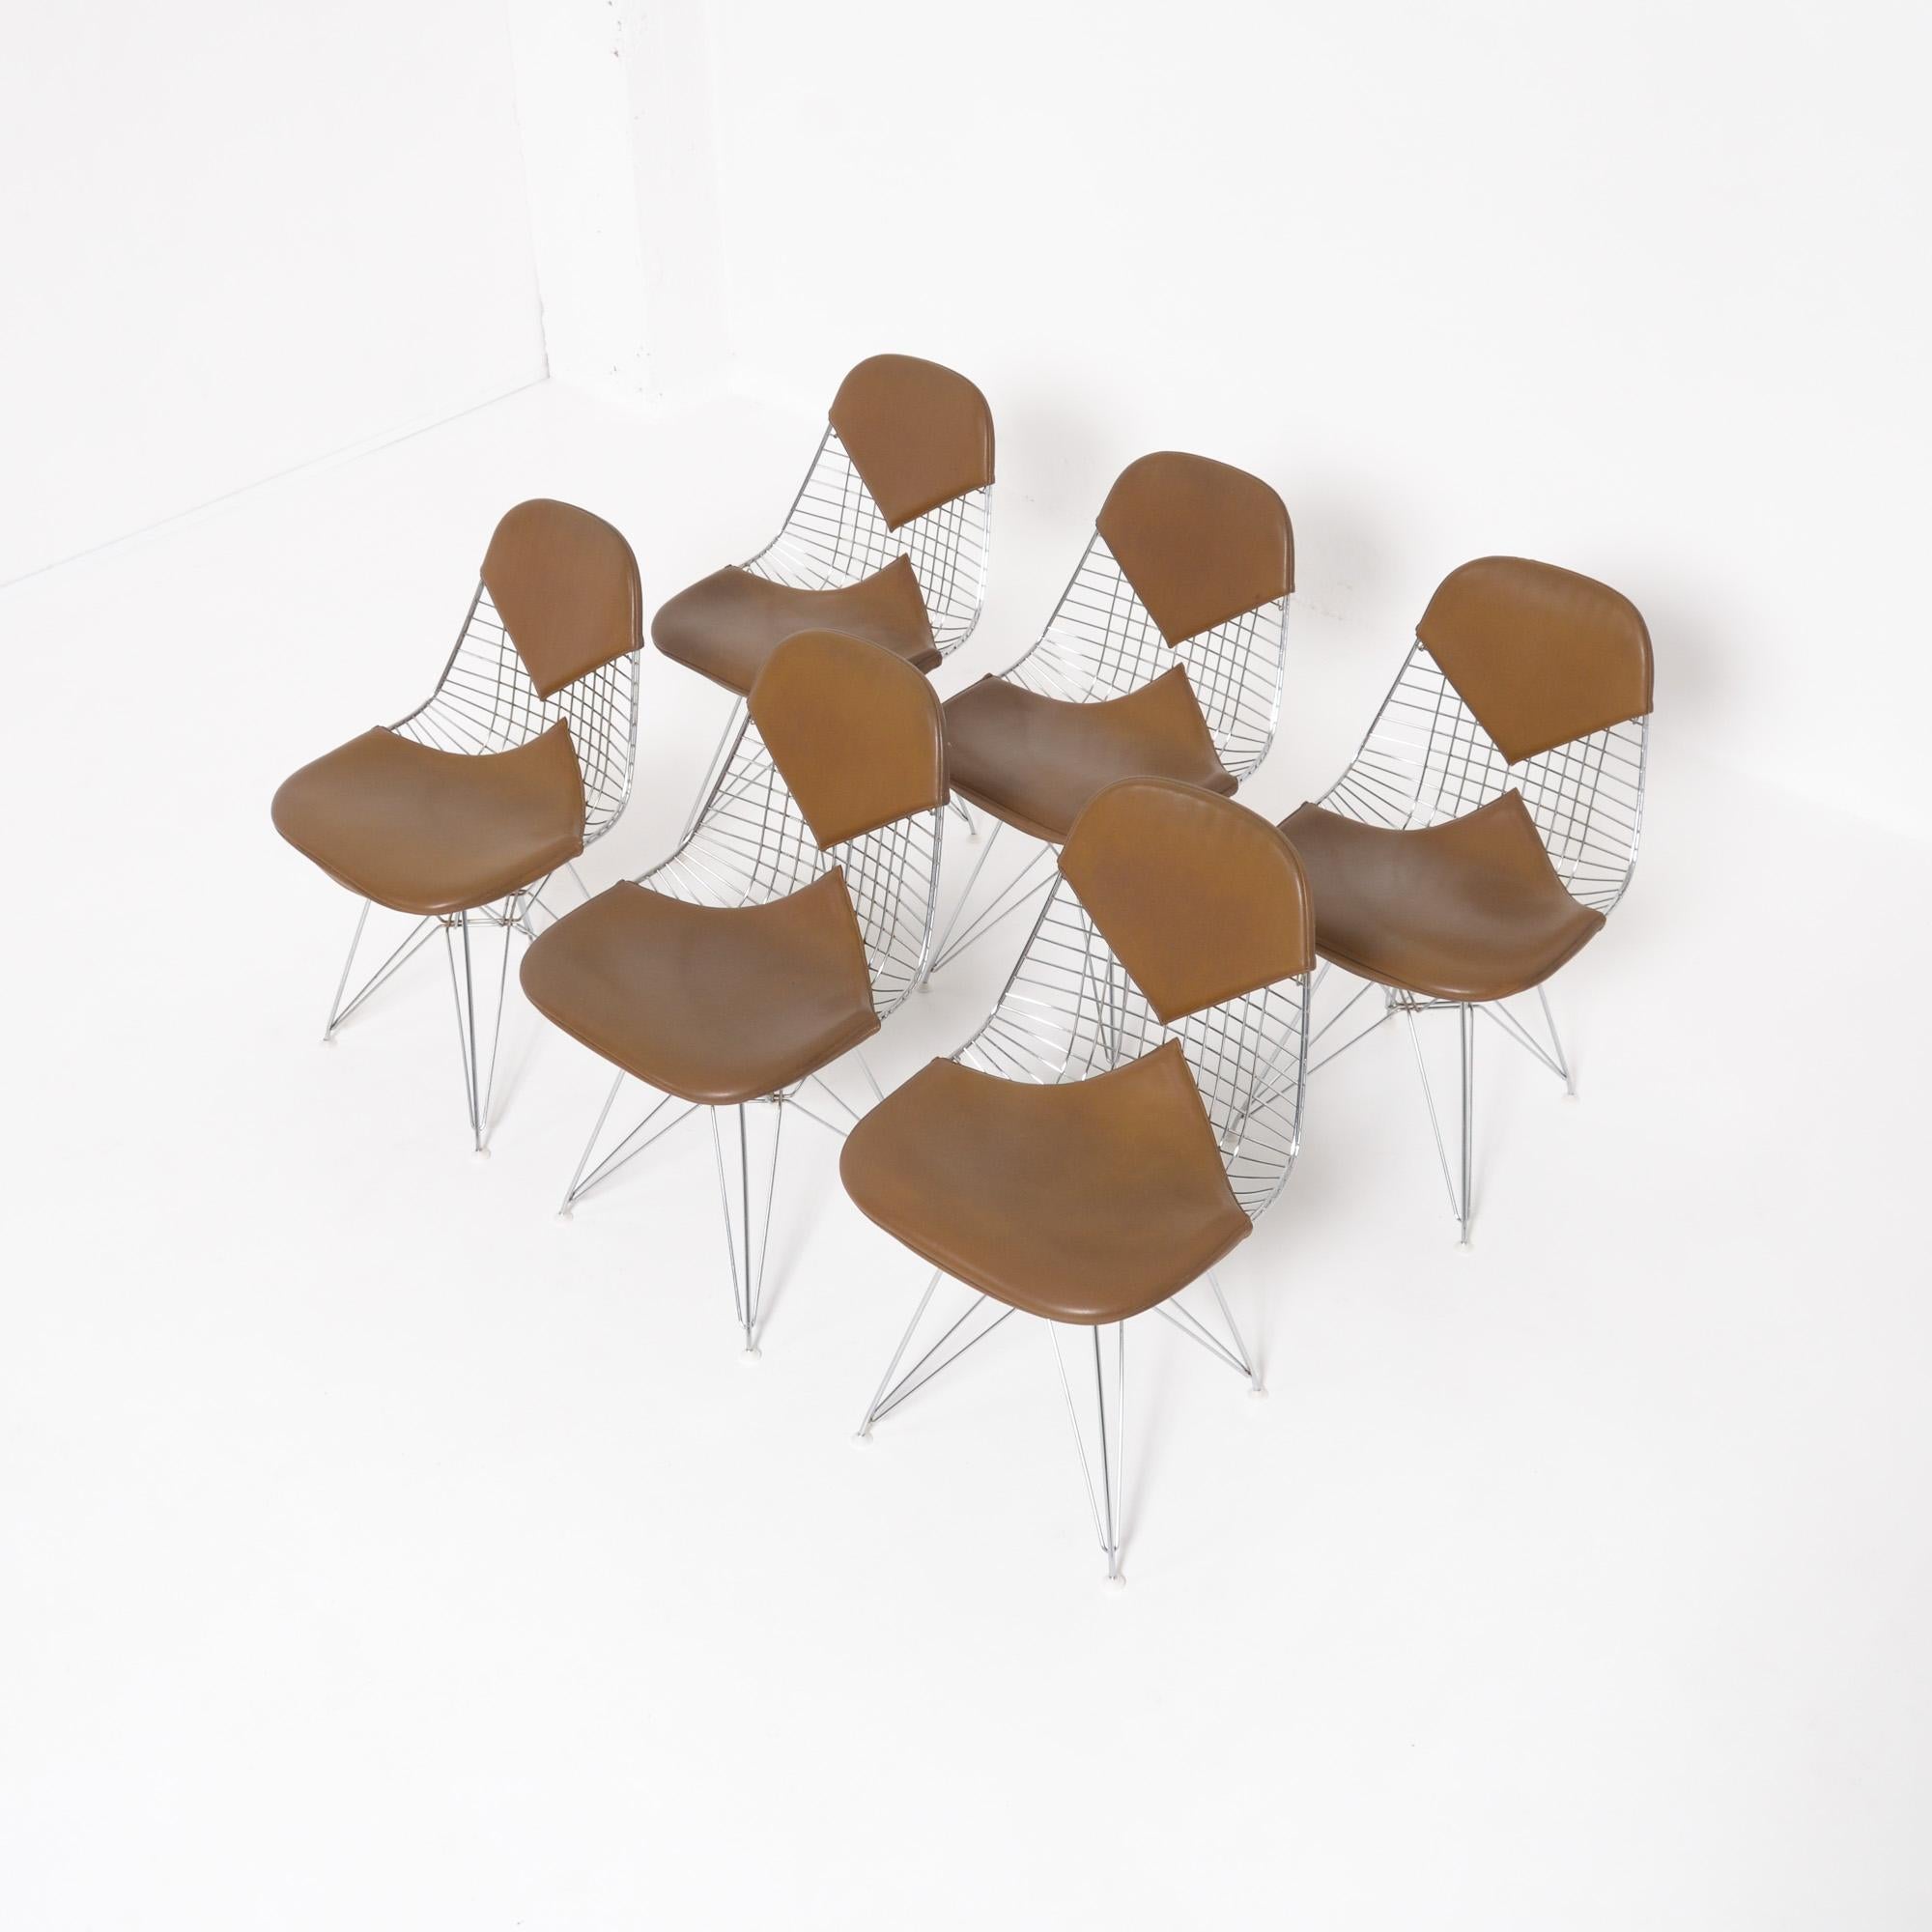 We offer you a set of 6 DKR Bikini wire chairs, designed by Charles and Ray Eames for Herman Miller.
In 1951, Charles and Ray Eames met the challenge of making a reasonably priced, quality chair that was light yet strong. Their solution – the Eames